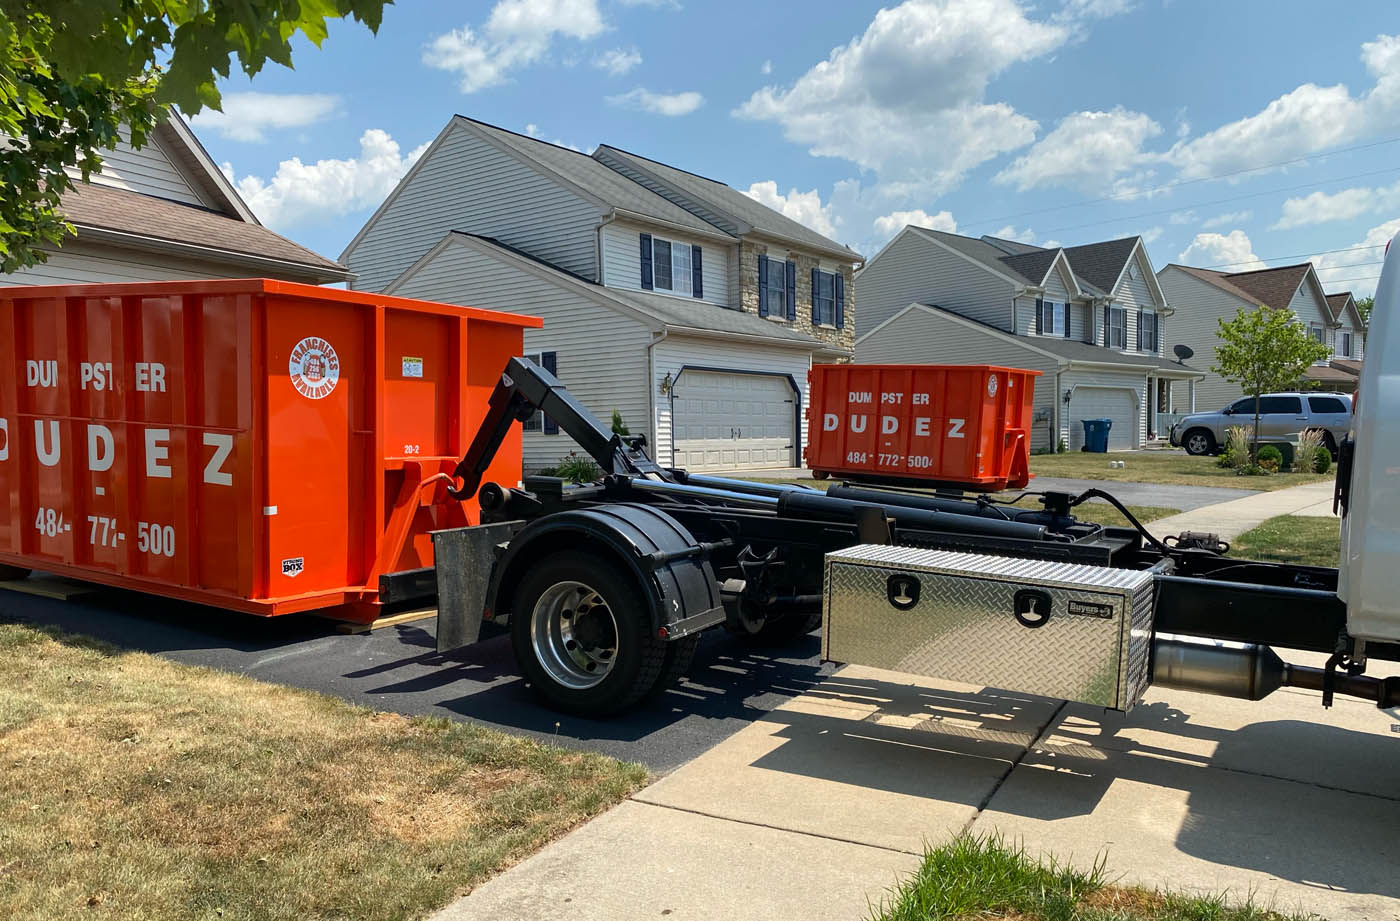 
				Two 25 yard dumpsters at a residential home.
			